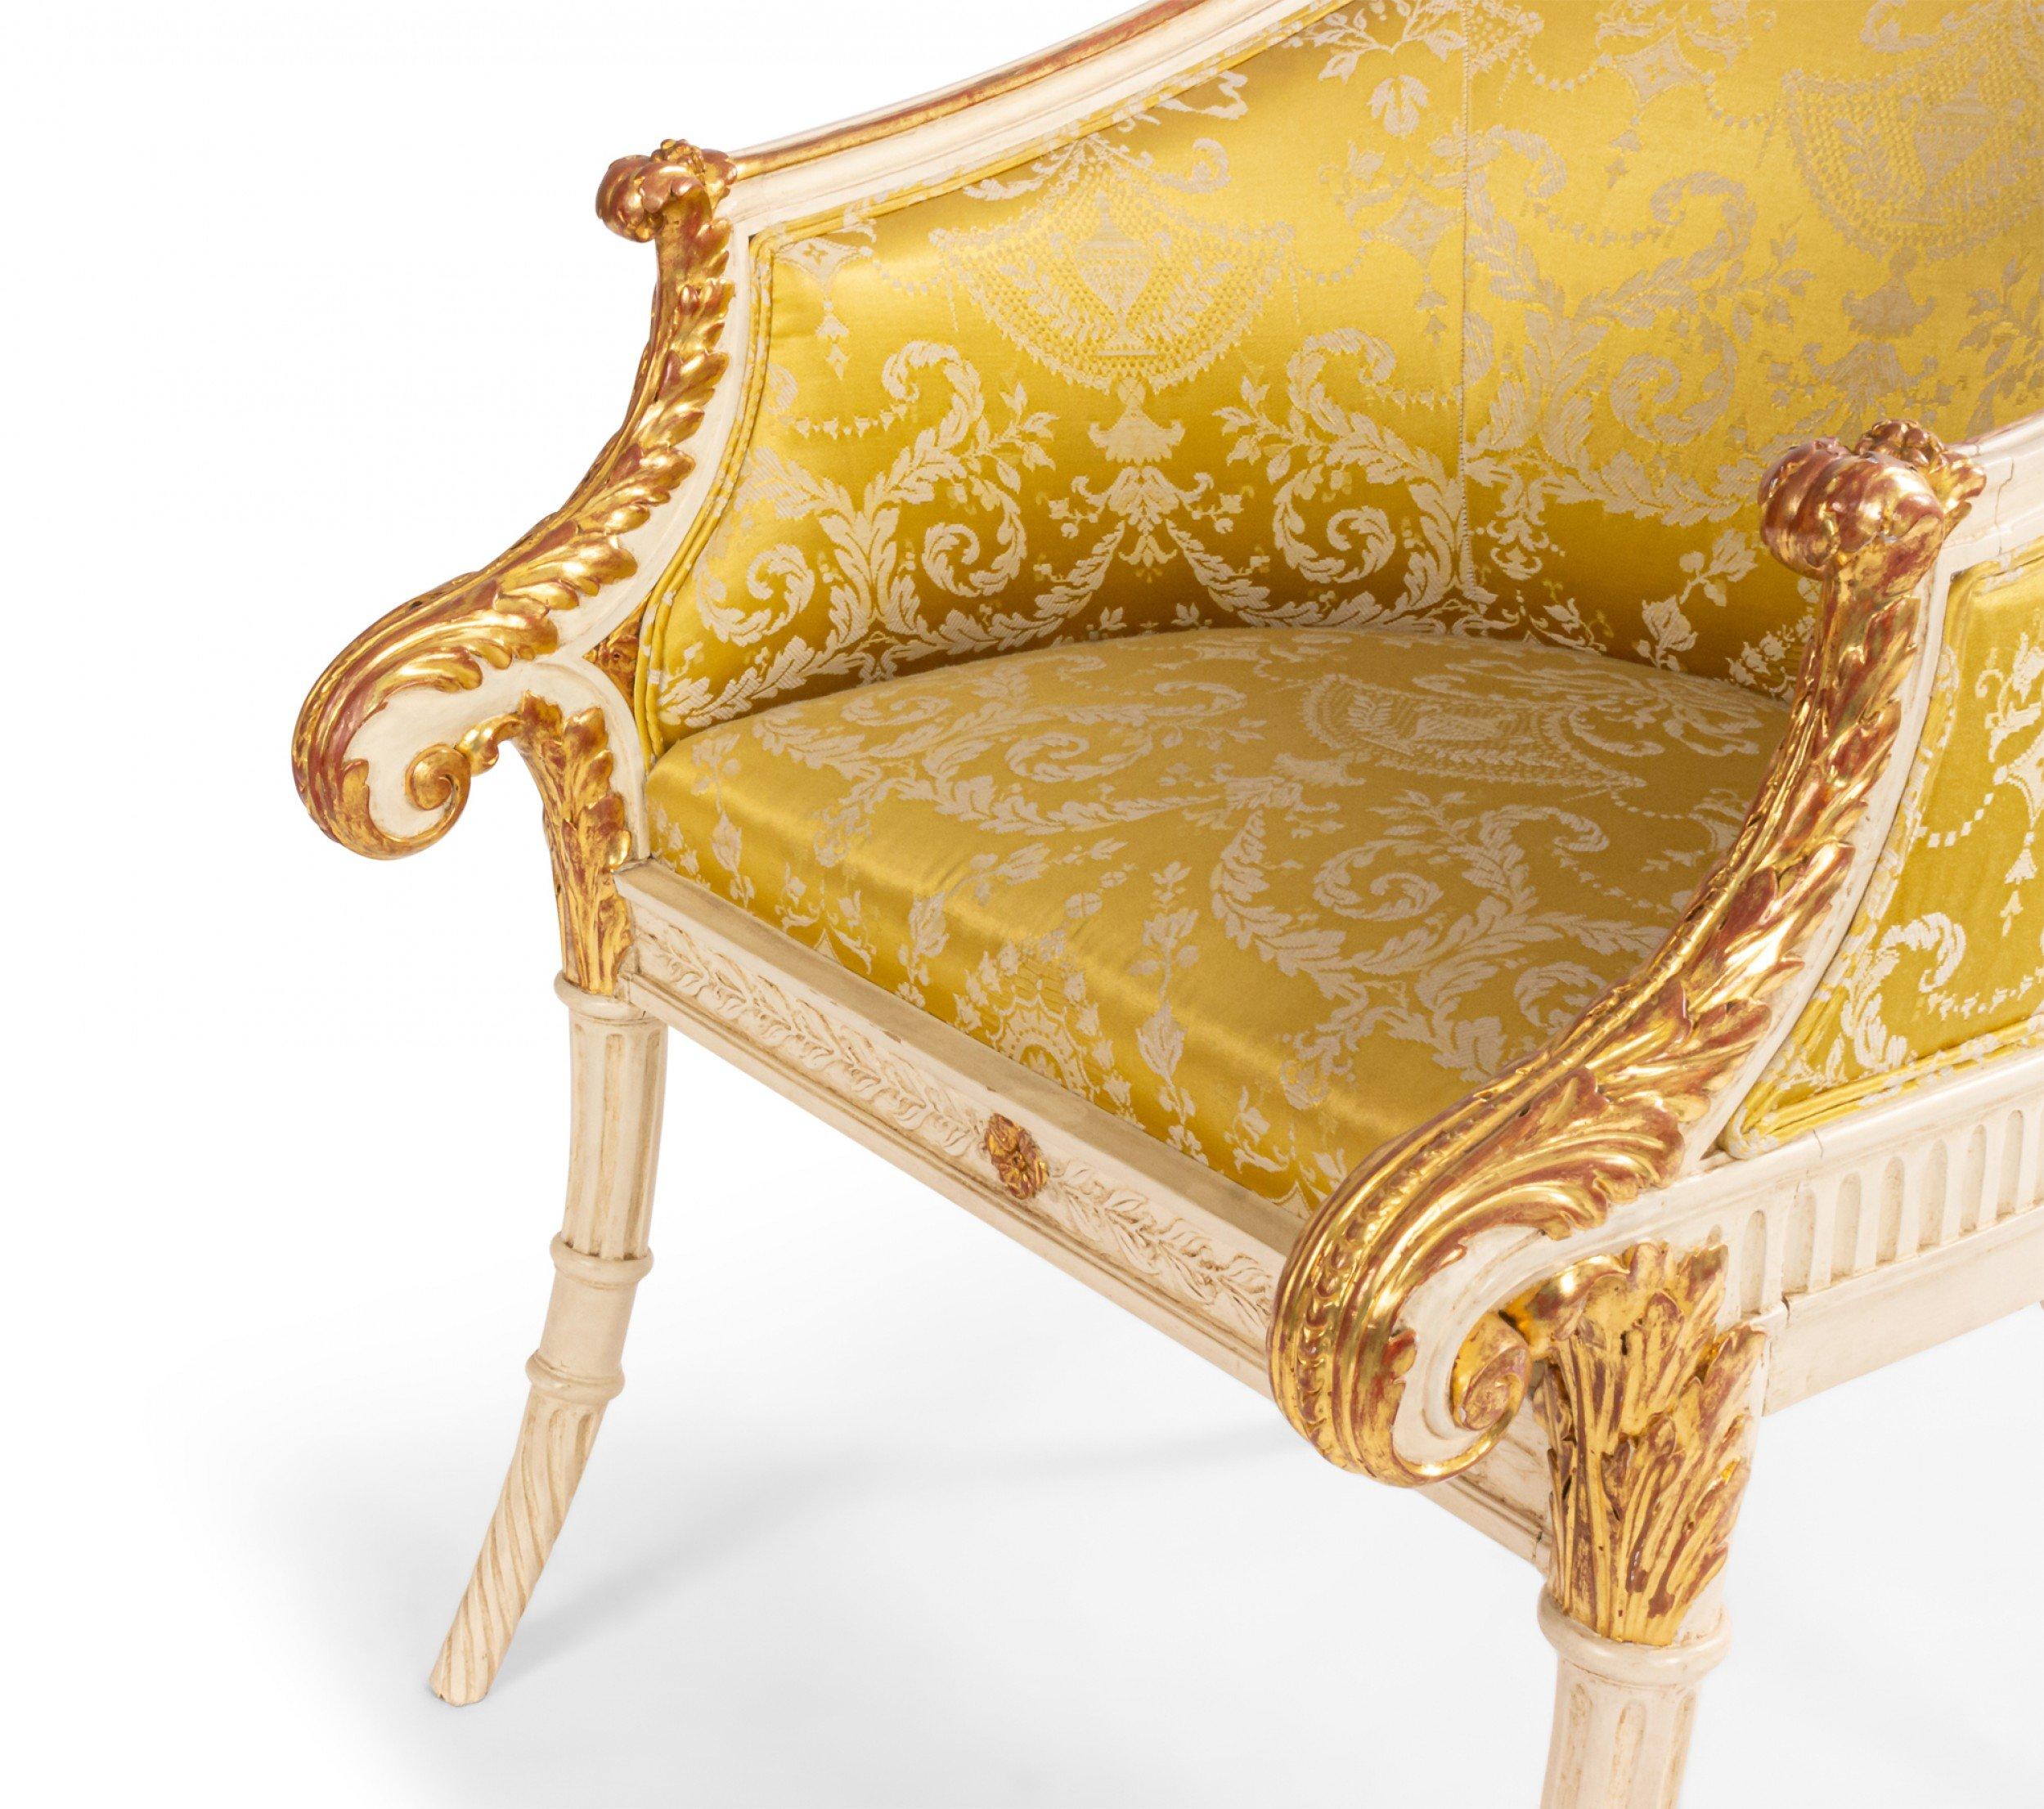 Italian Neo-Classic Style 19th Century White and Gold Arm Chair For Sale 4